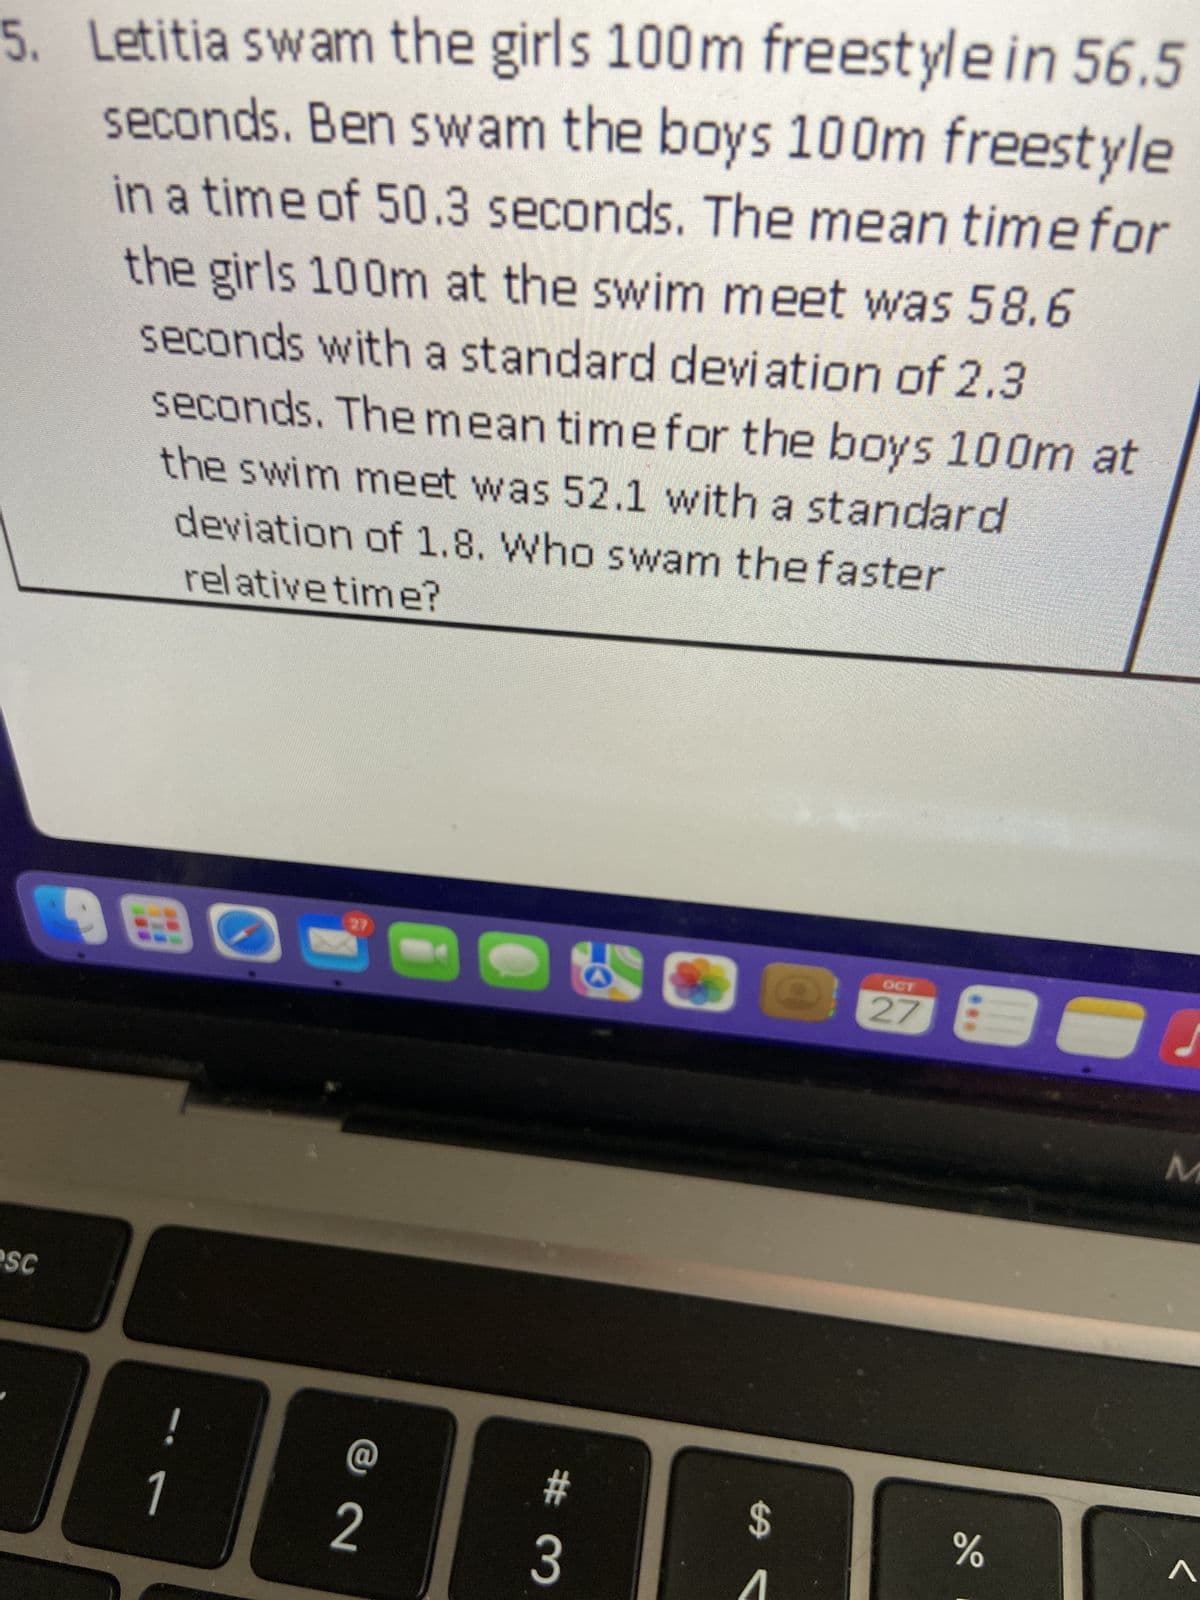 5. Letitia swam the girls 100m freestyle in 56.5
seconds. Ben swam the boys 100m freestyle
in a time of 50.3 seconds. The mean time for
the girls 100m at the swim meet was 58.6
seconds with a standard deviation of 2.3
seconds. The mean time for the boys 100m at
the swim meet was 52.1 with a standard
deviation of 1.8. Who swam the faster
relative time?
esc
180
1
27
@
2
#3
13
$
OCT
do
%
M
^